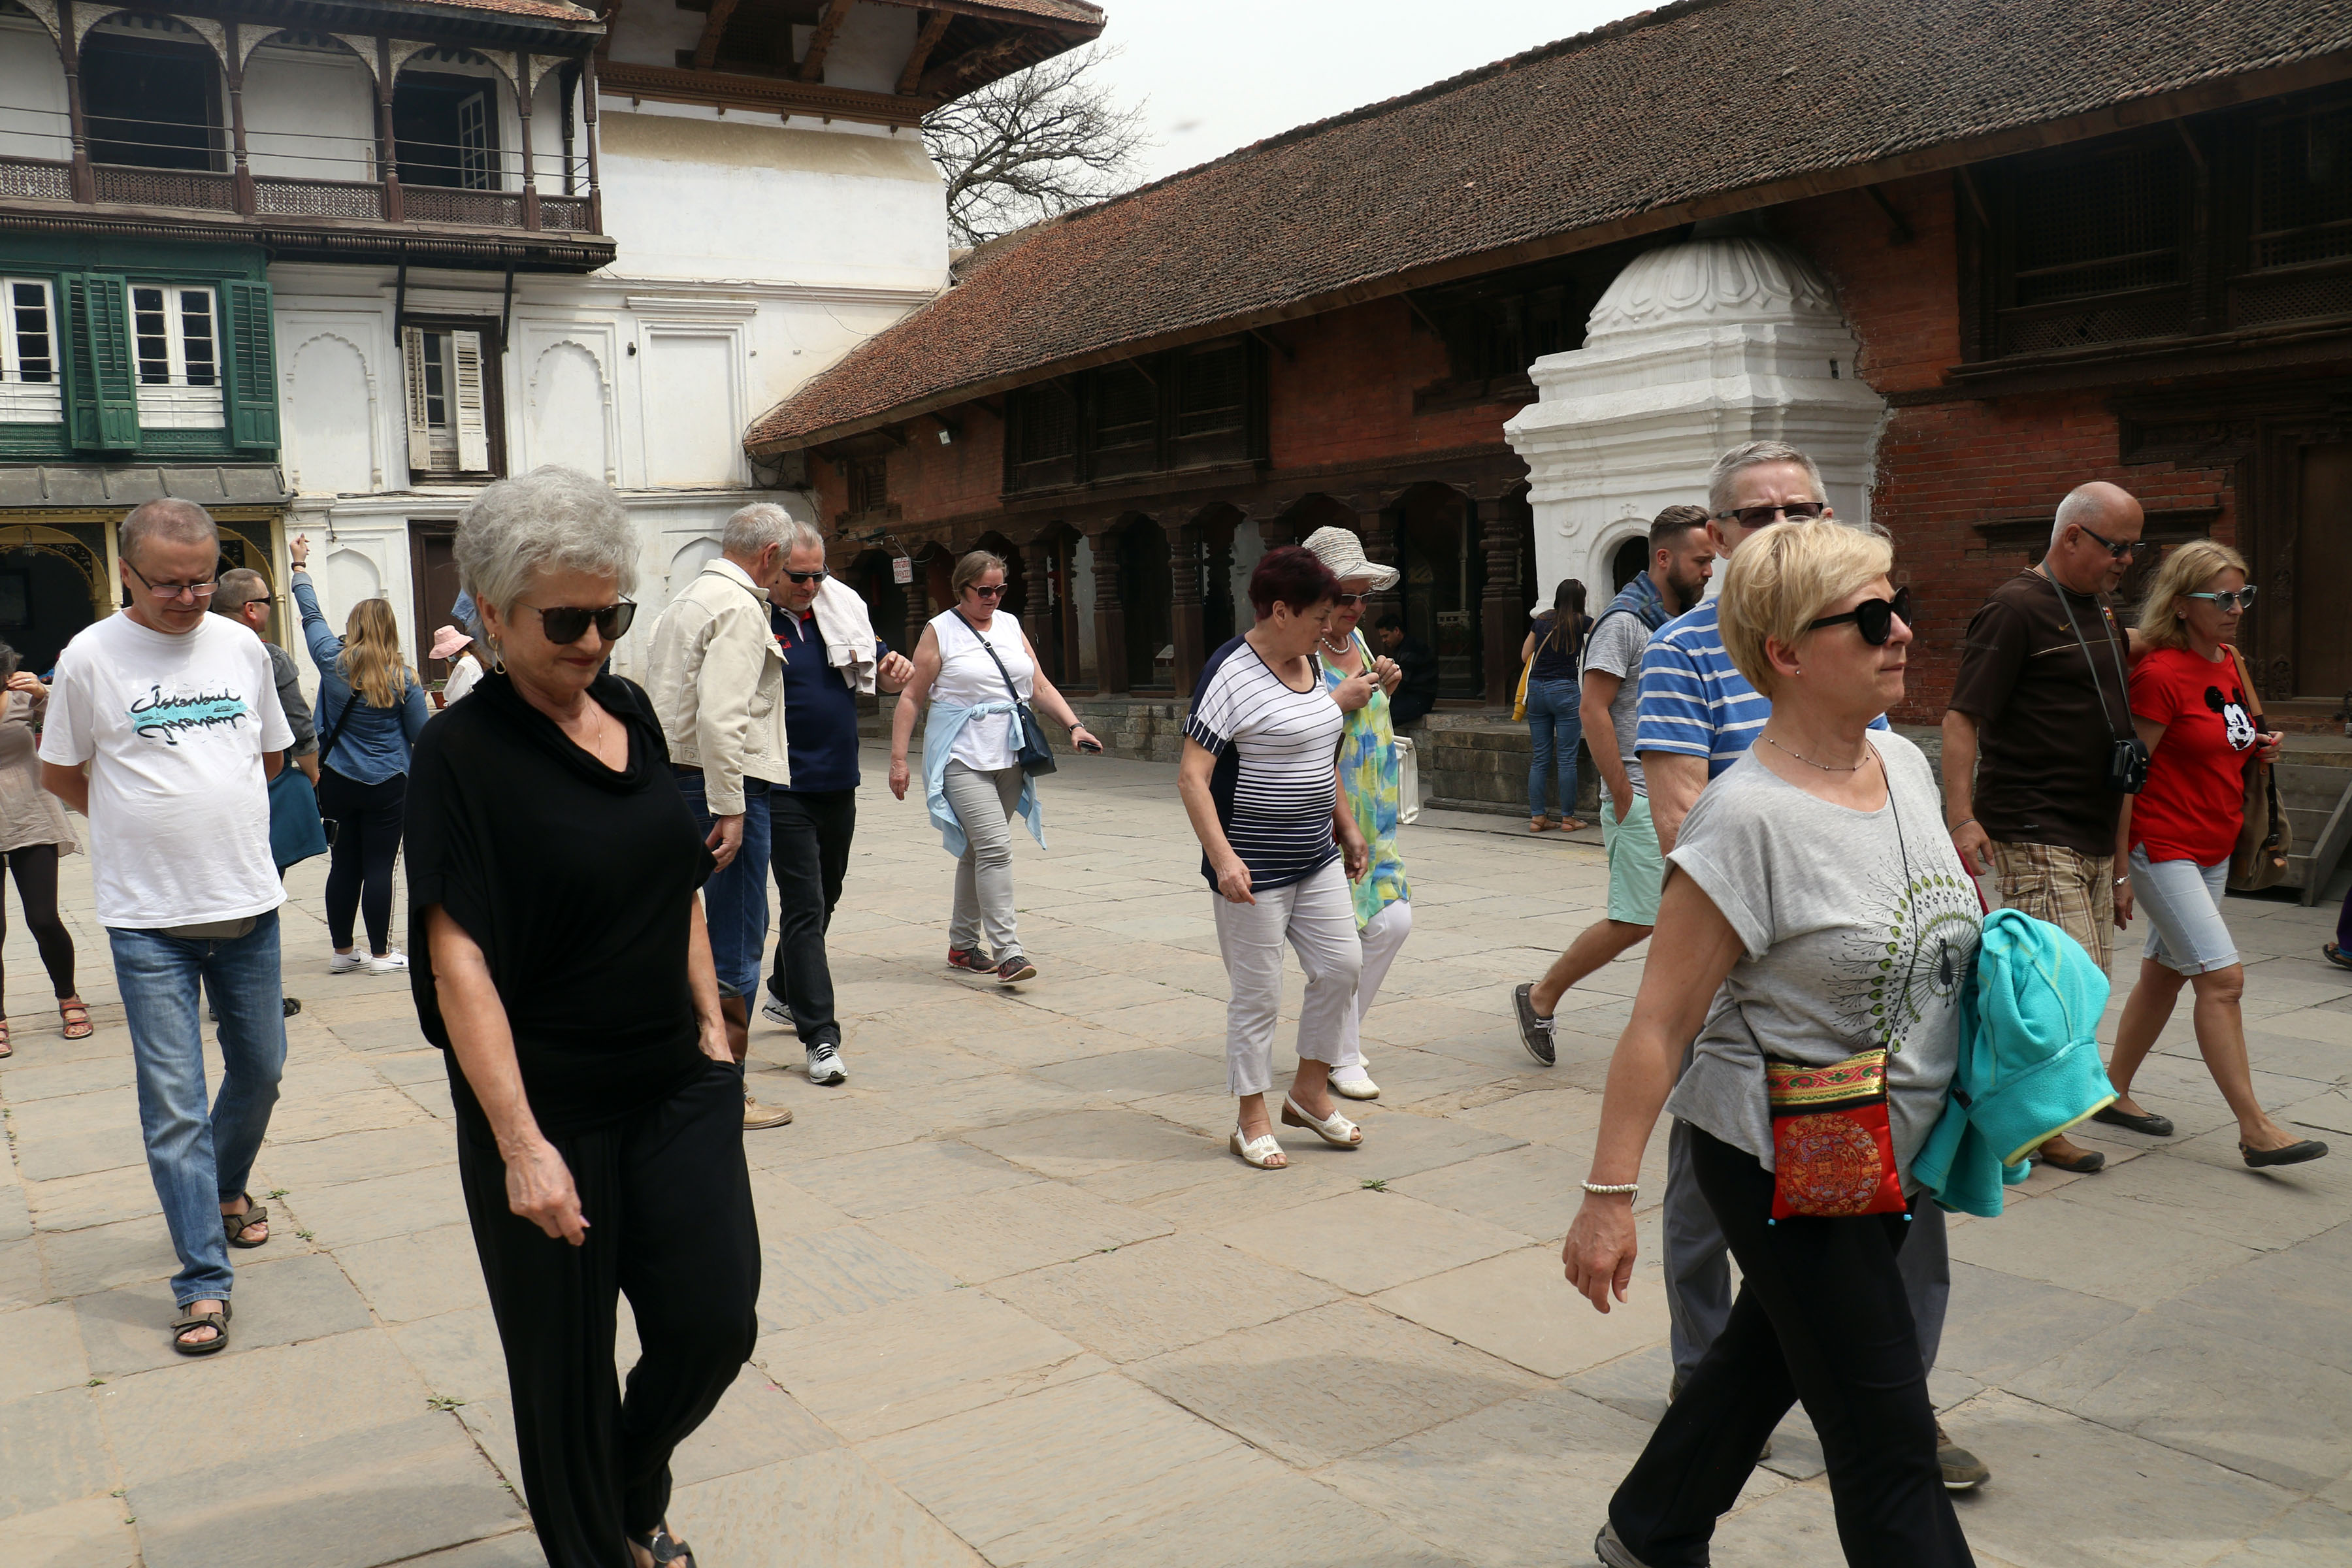 Tourists’ average stay increases in Nepal